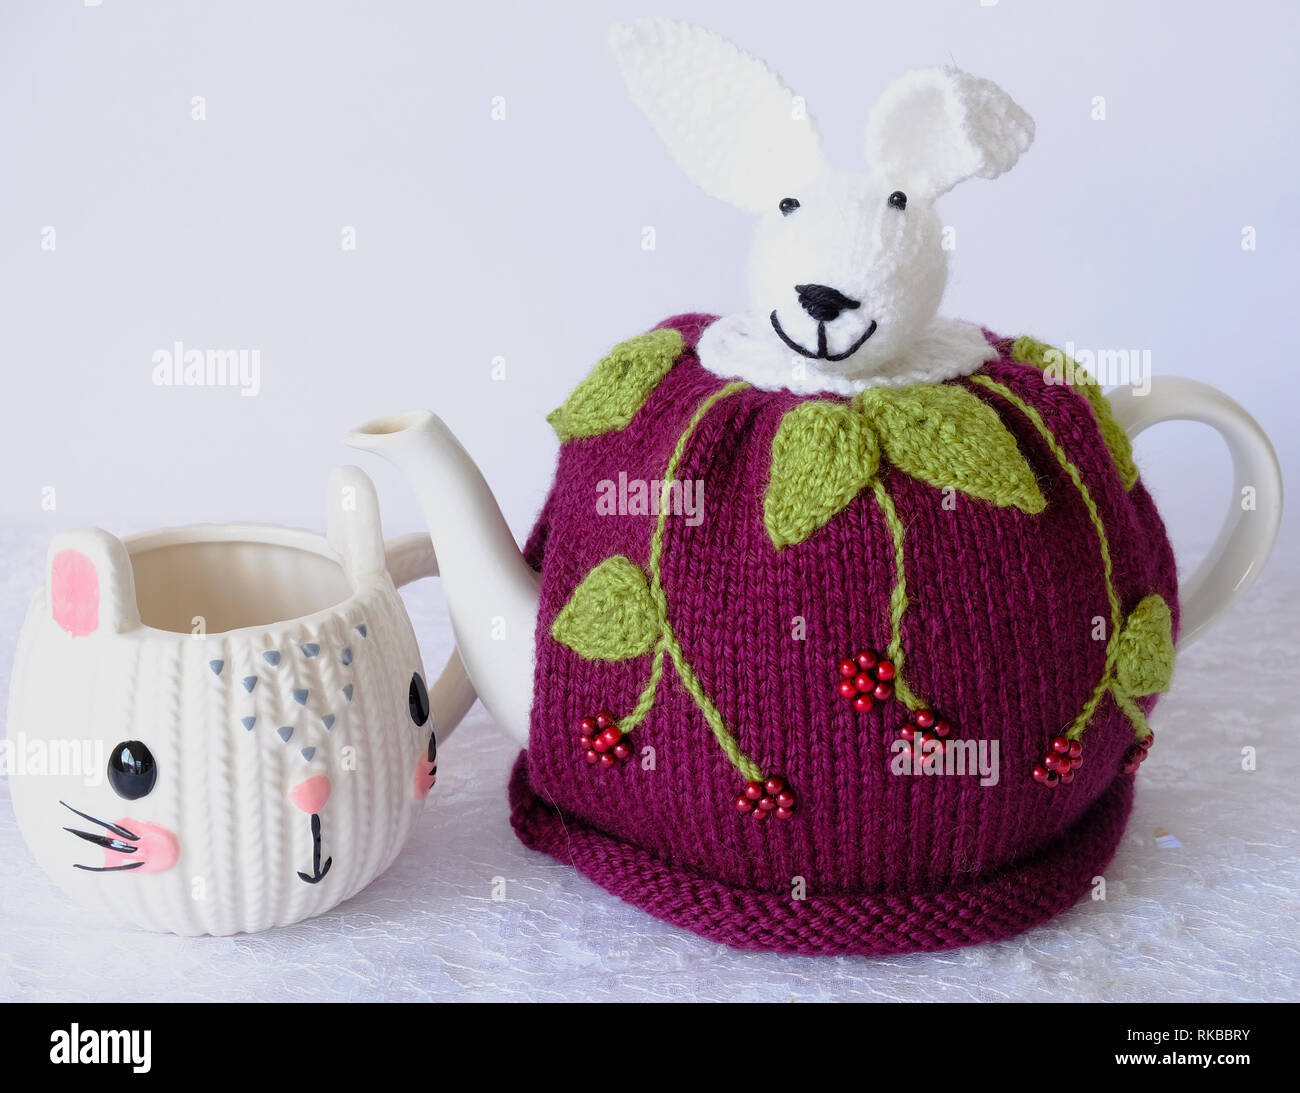 Handknitted tea cosy in the shape of a Bunny Rabbit Stock Photo